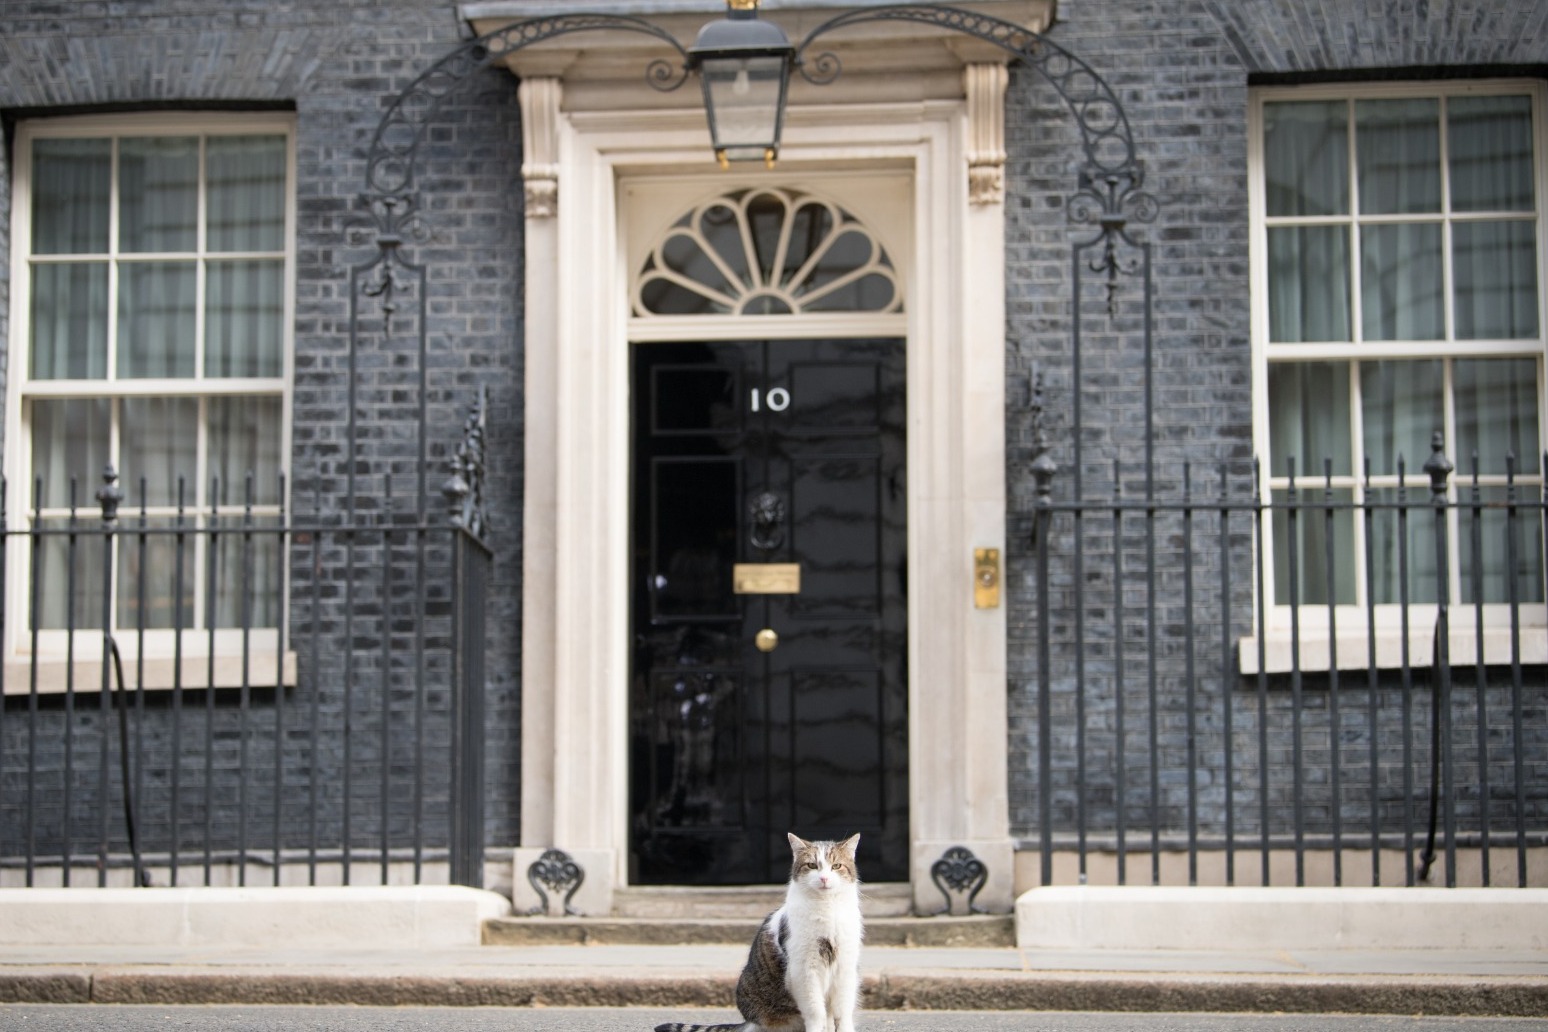 The Electoral Commission has announced it will investigate the refurbishment of Boris Johnson’s Downing Street flat 